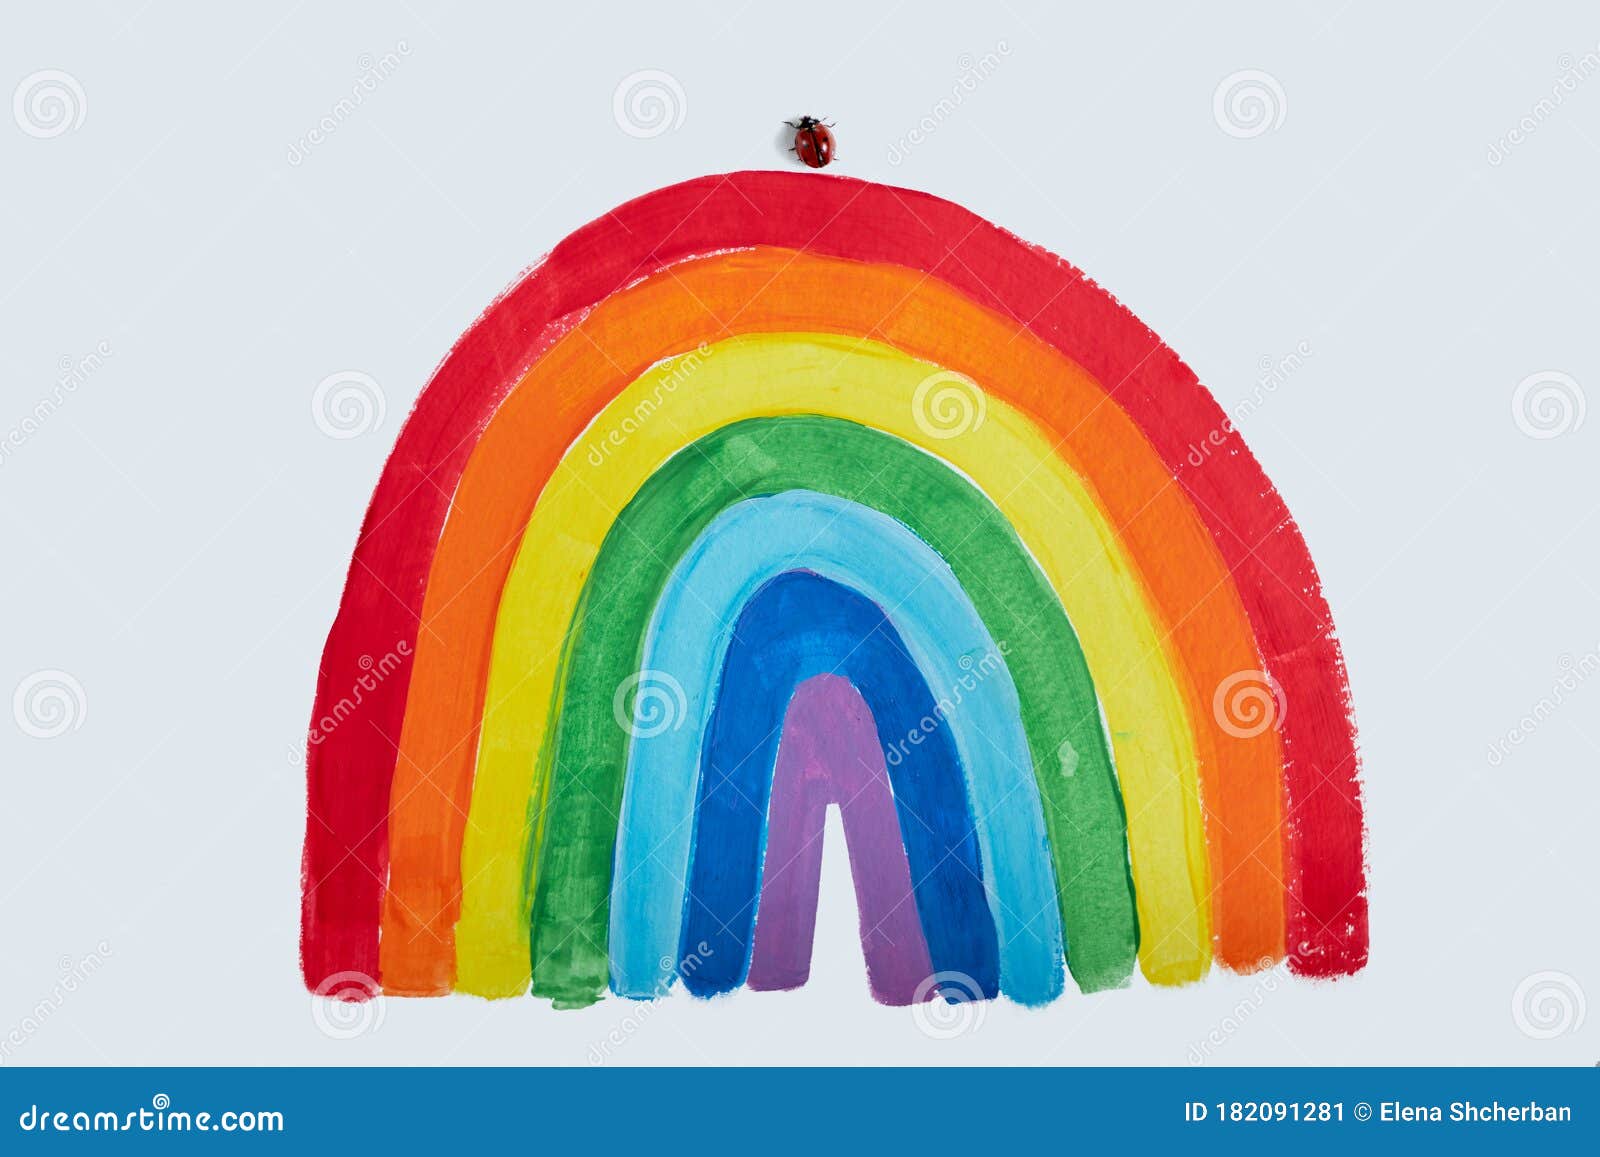 thank to nhs. childrens hand drawing rainbow on paper. greating card for nurses. ladybug sat